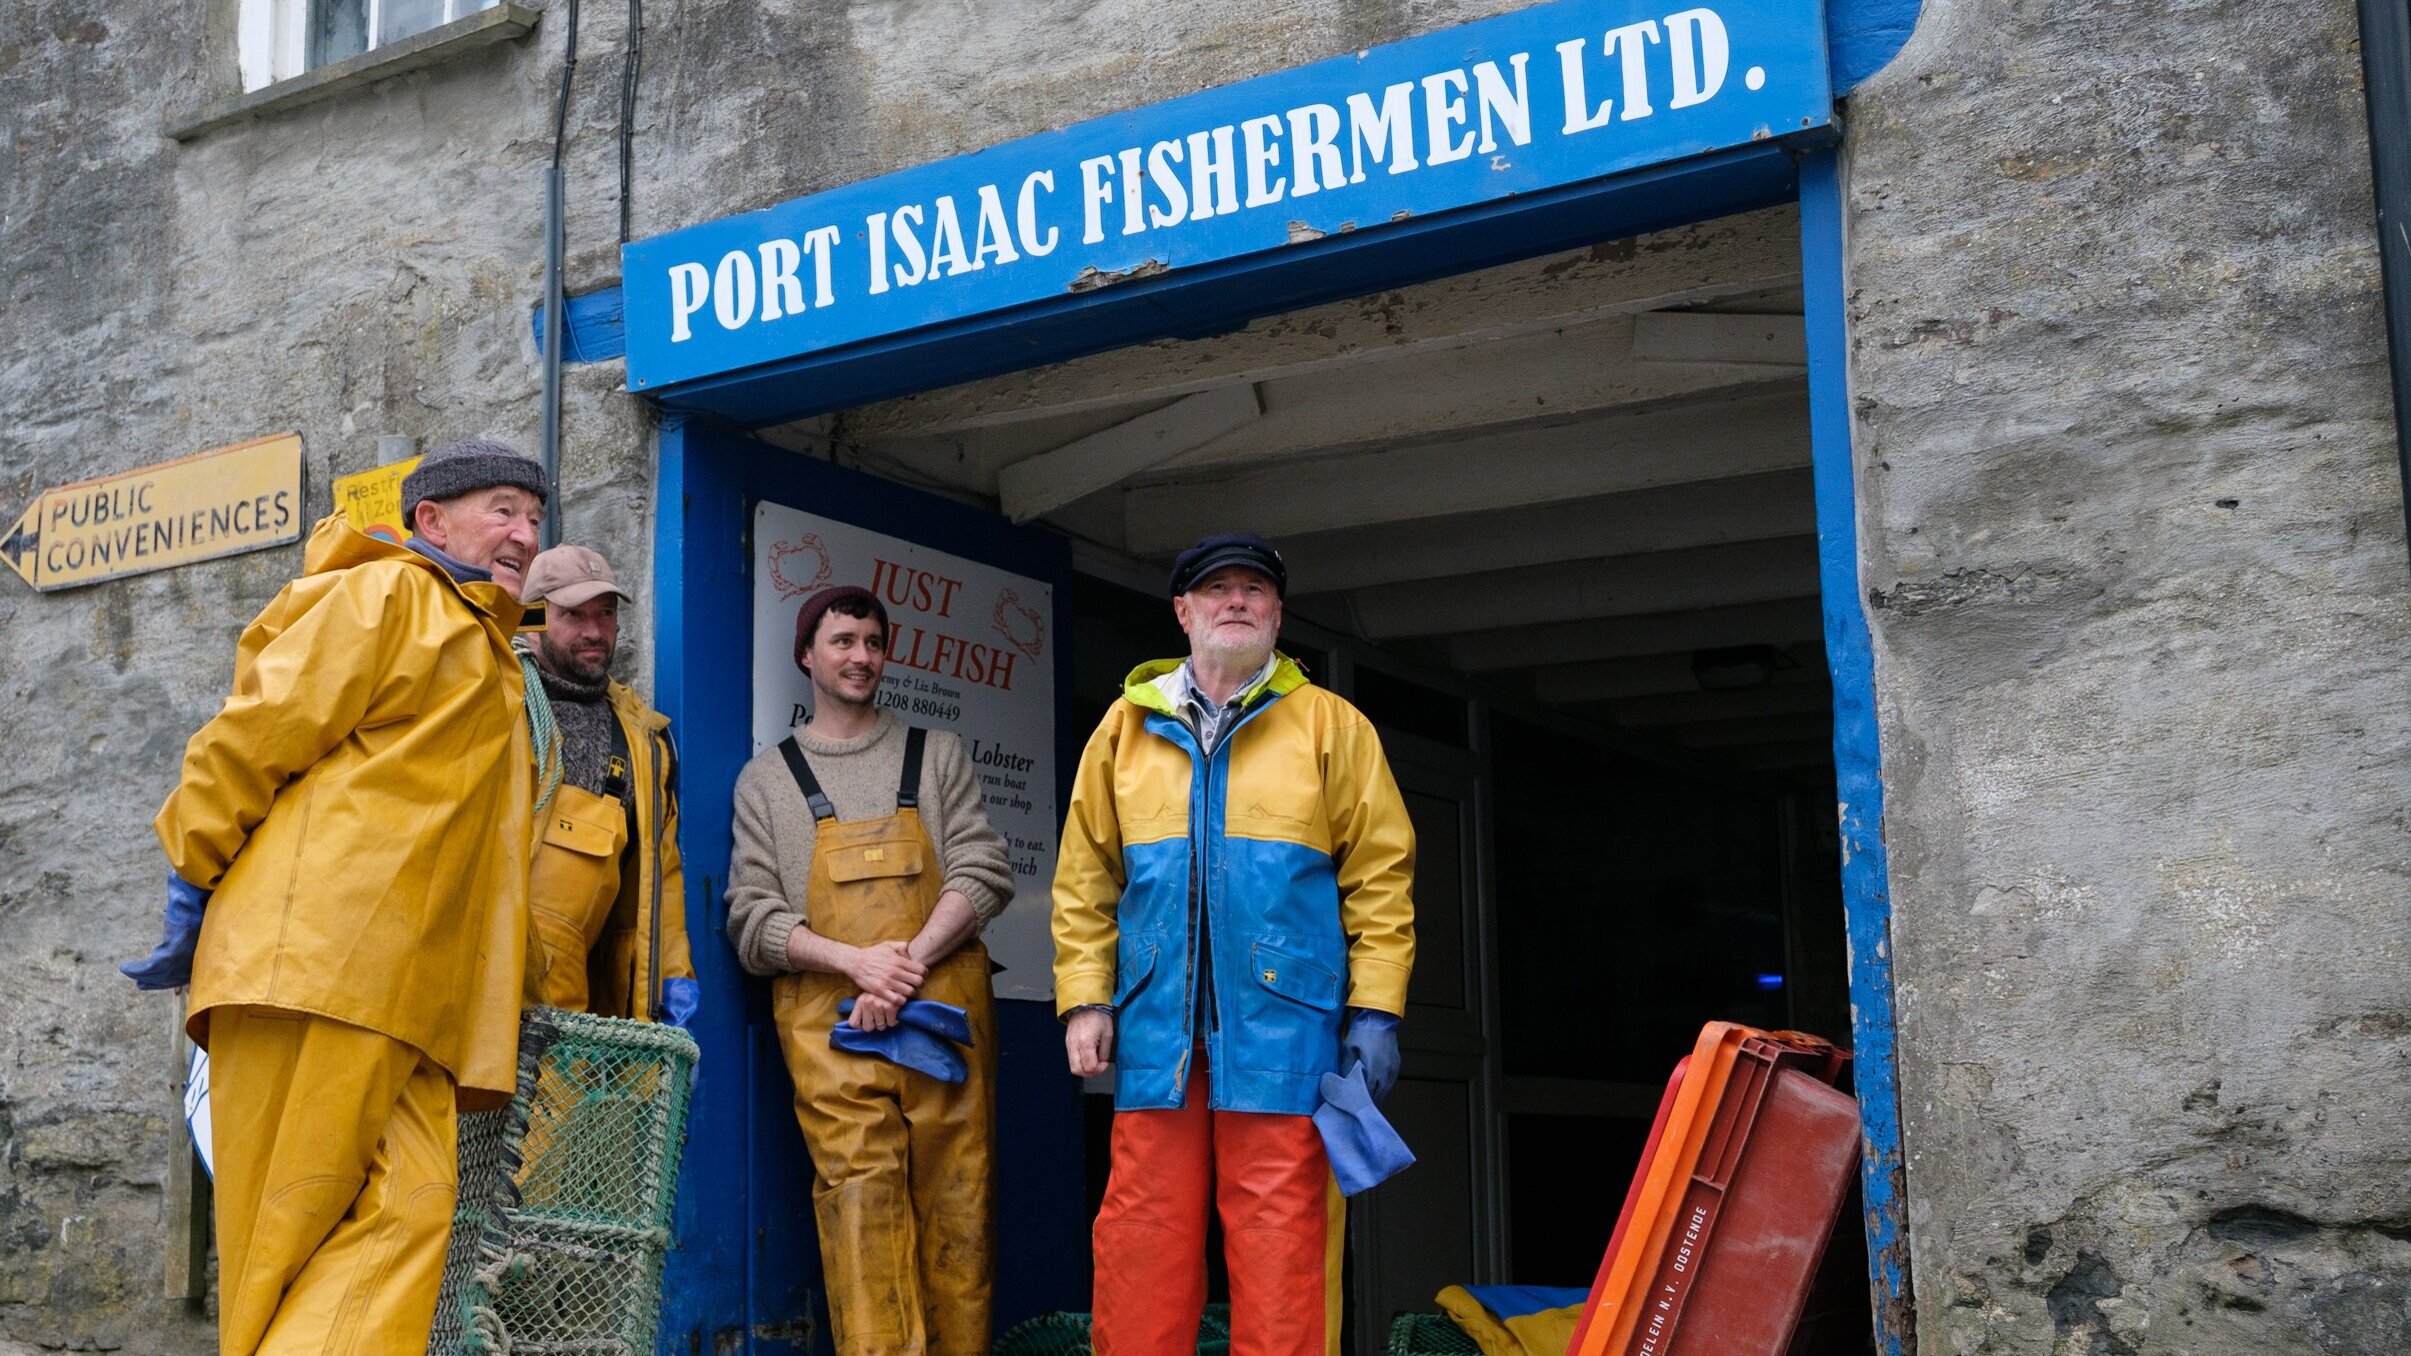 Fisherman's Friends Film - Ahoy, Fisherman's Friends Fans! Remember to tune  in to our stories tomorrow evening to see all the action from the Premiere  of #FishermansFriends #OneAndAll! 🎣